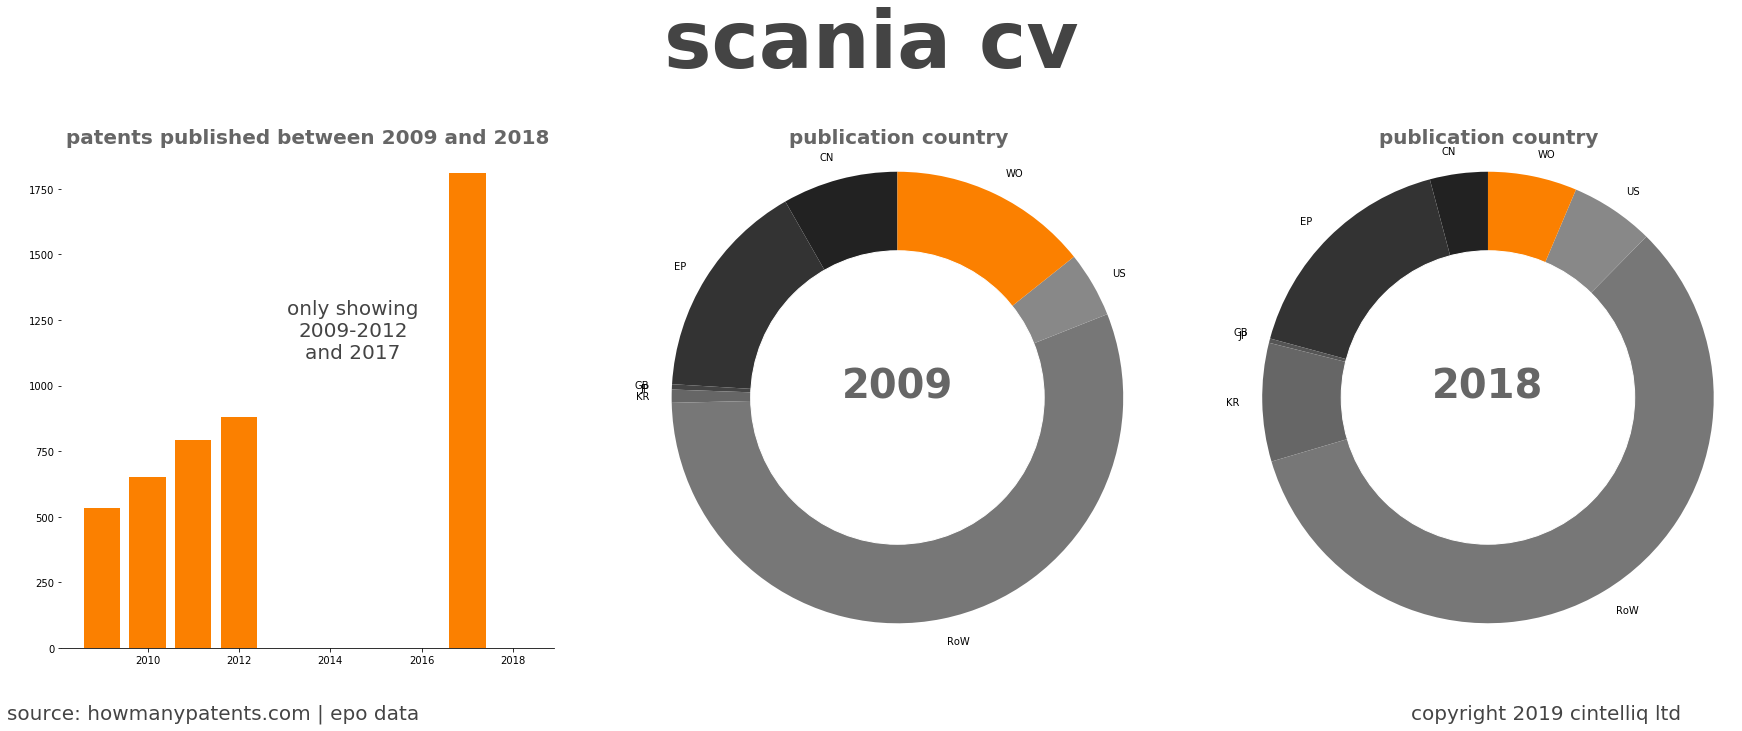 summary of patents for Scania Cv